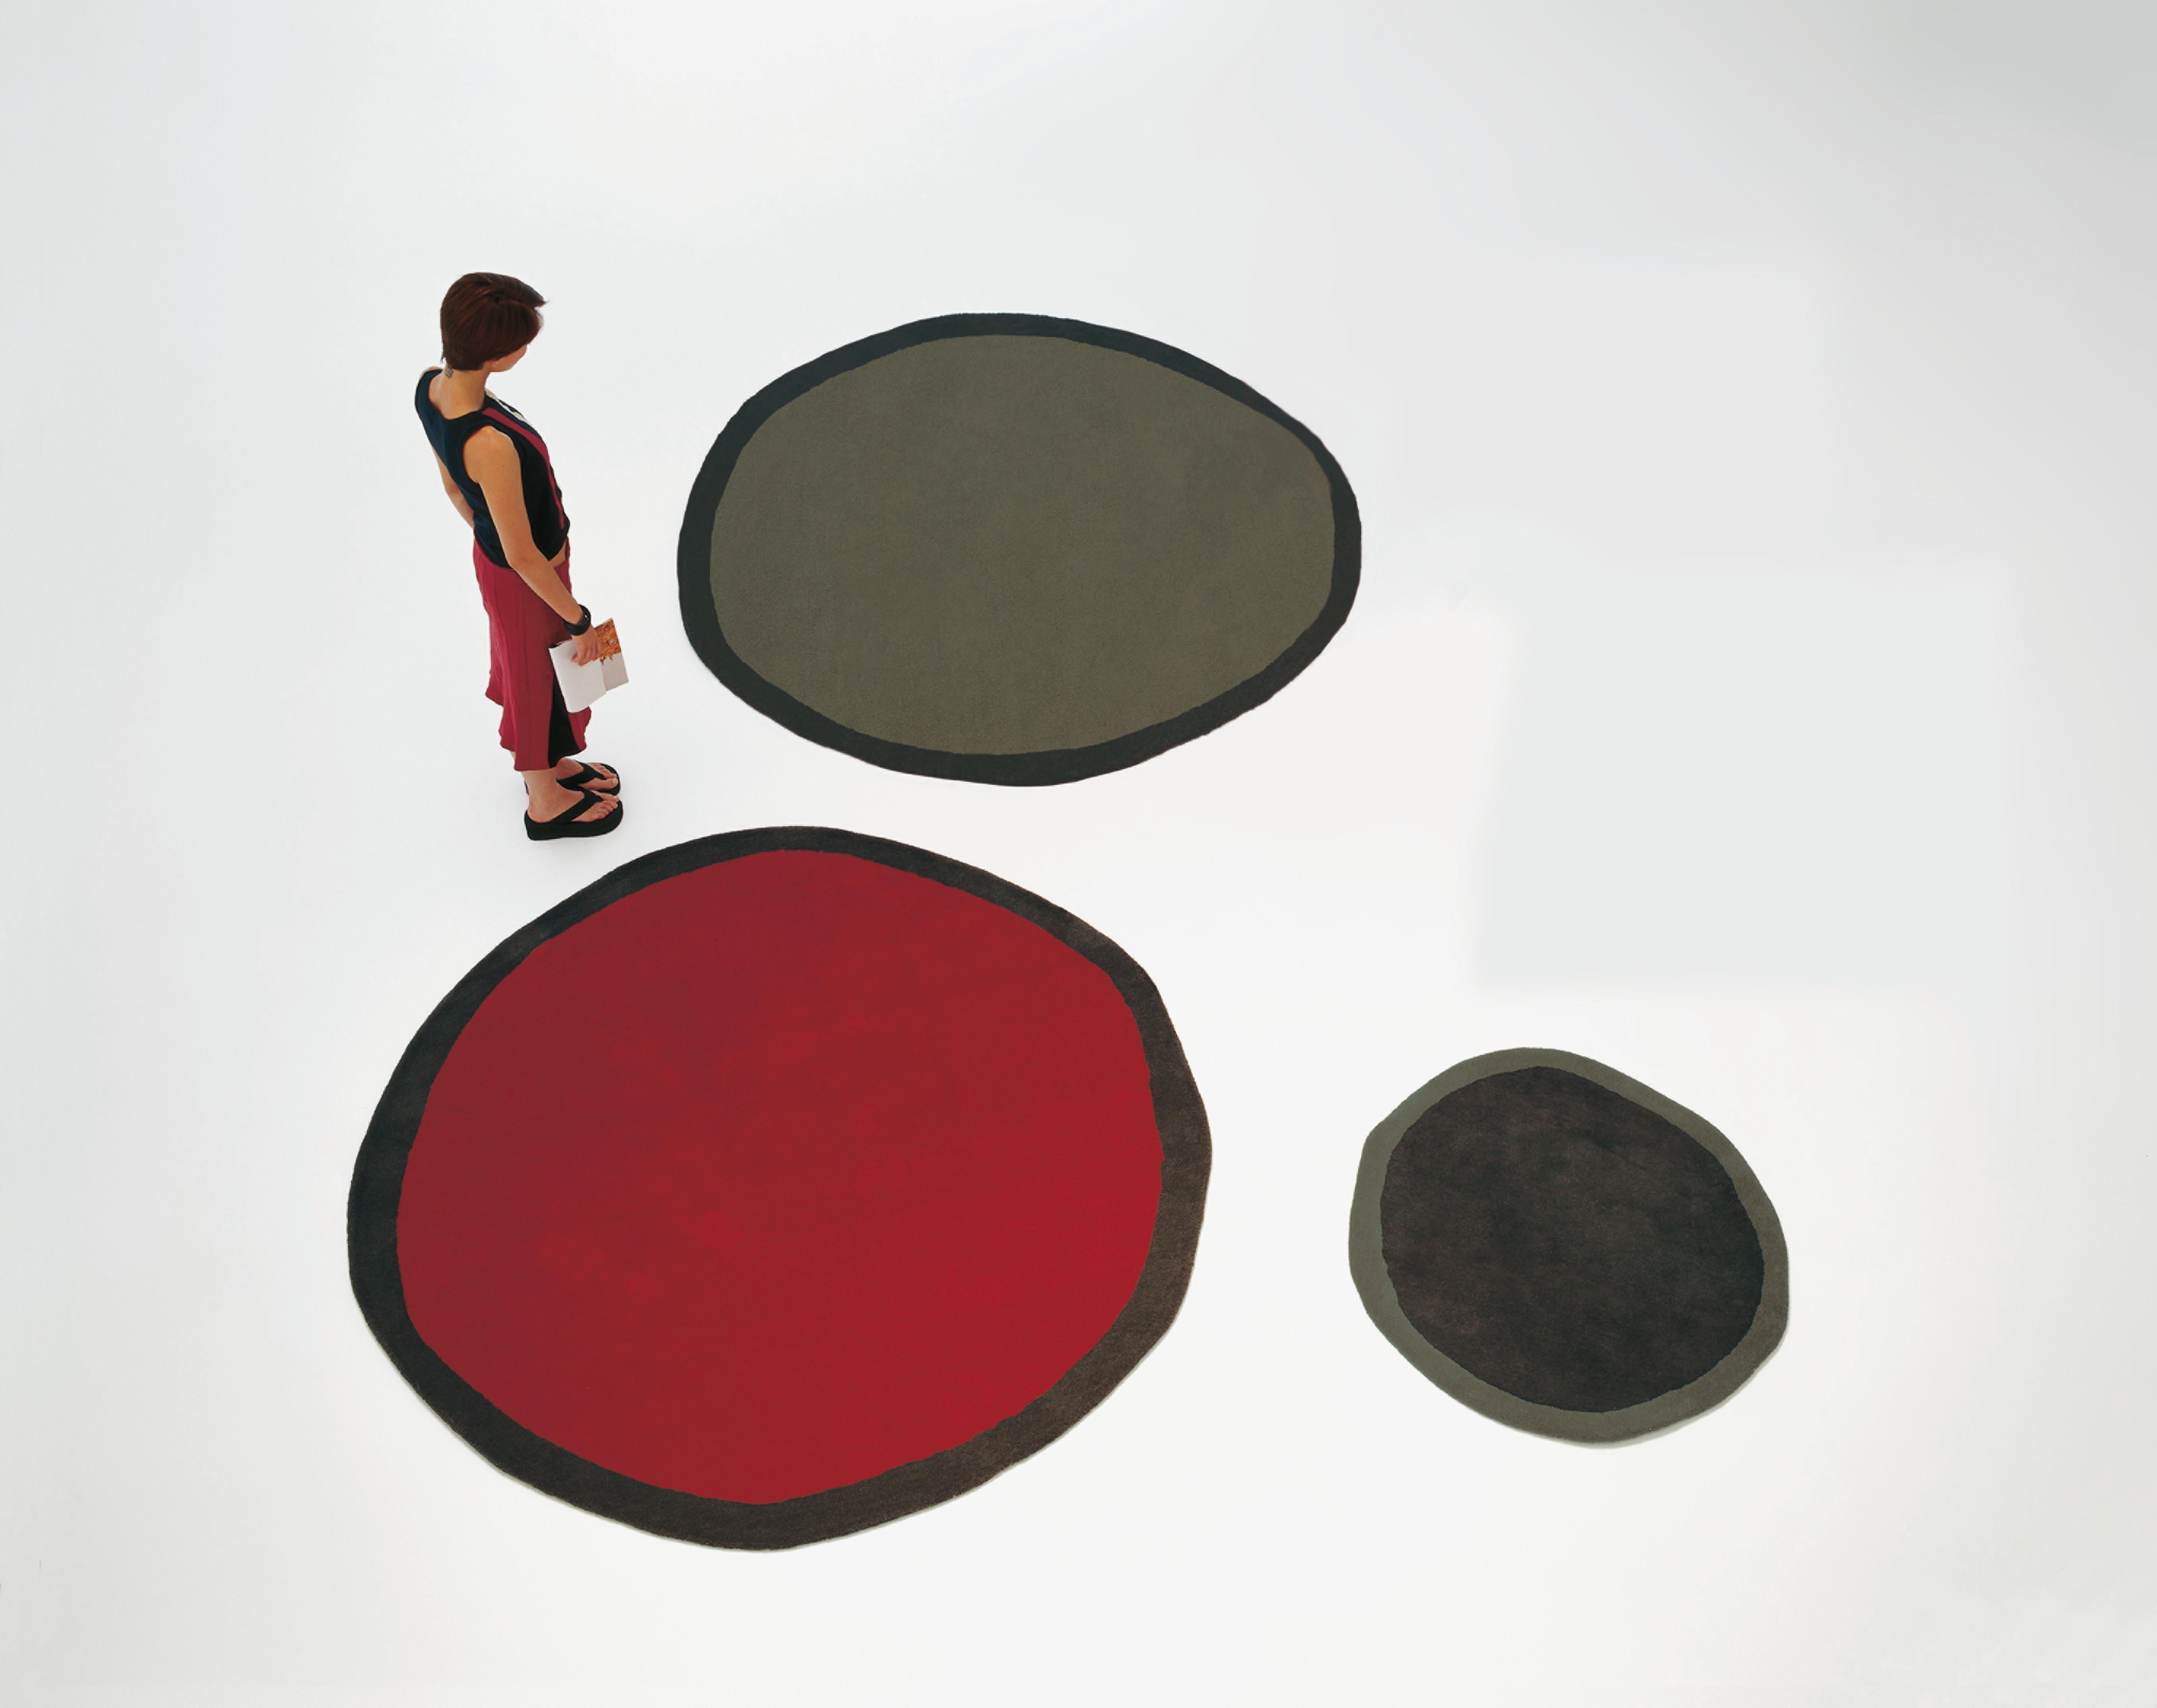 Almost perfect, almost serene, almost discreet and indiscreet, almost happy. The simplicity of an irregular outline defines the form of each Aros rug.

Comprised of three circular models in contrasting colors and two different sizes, and a square